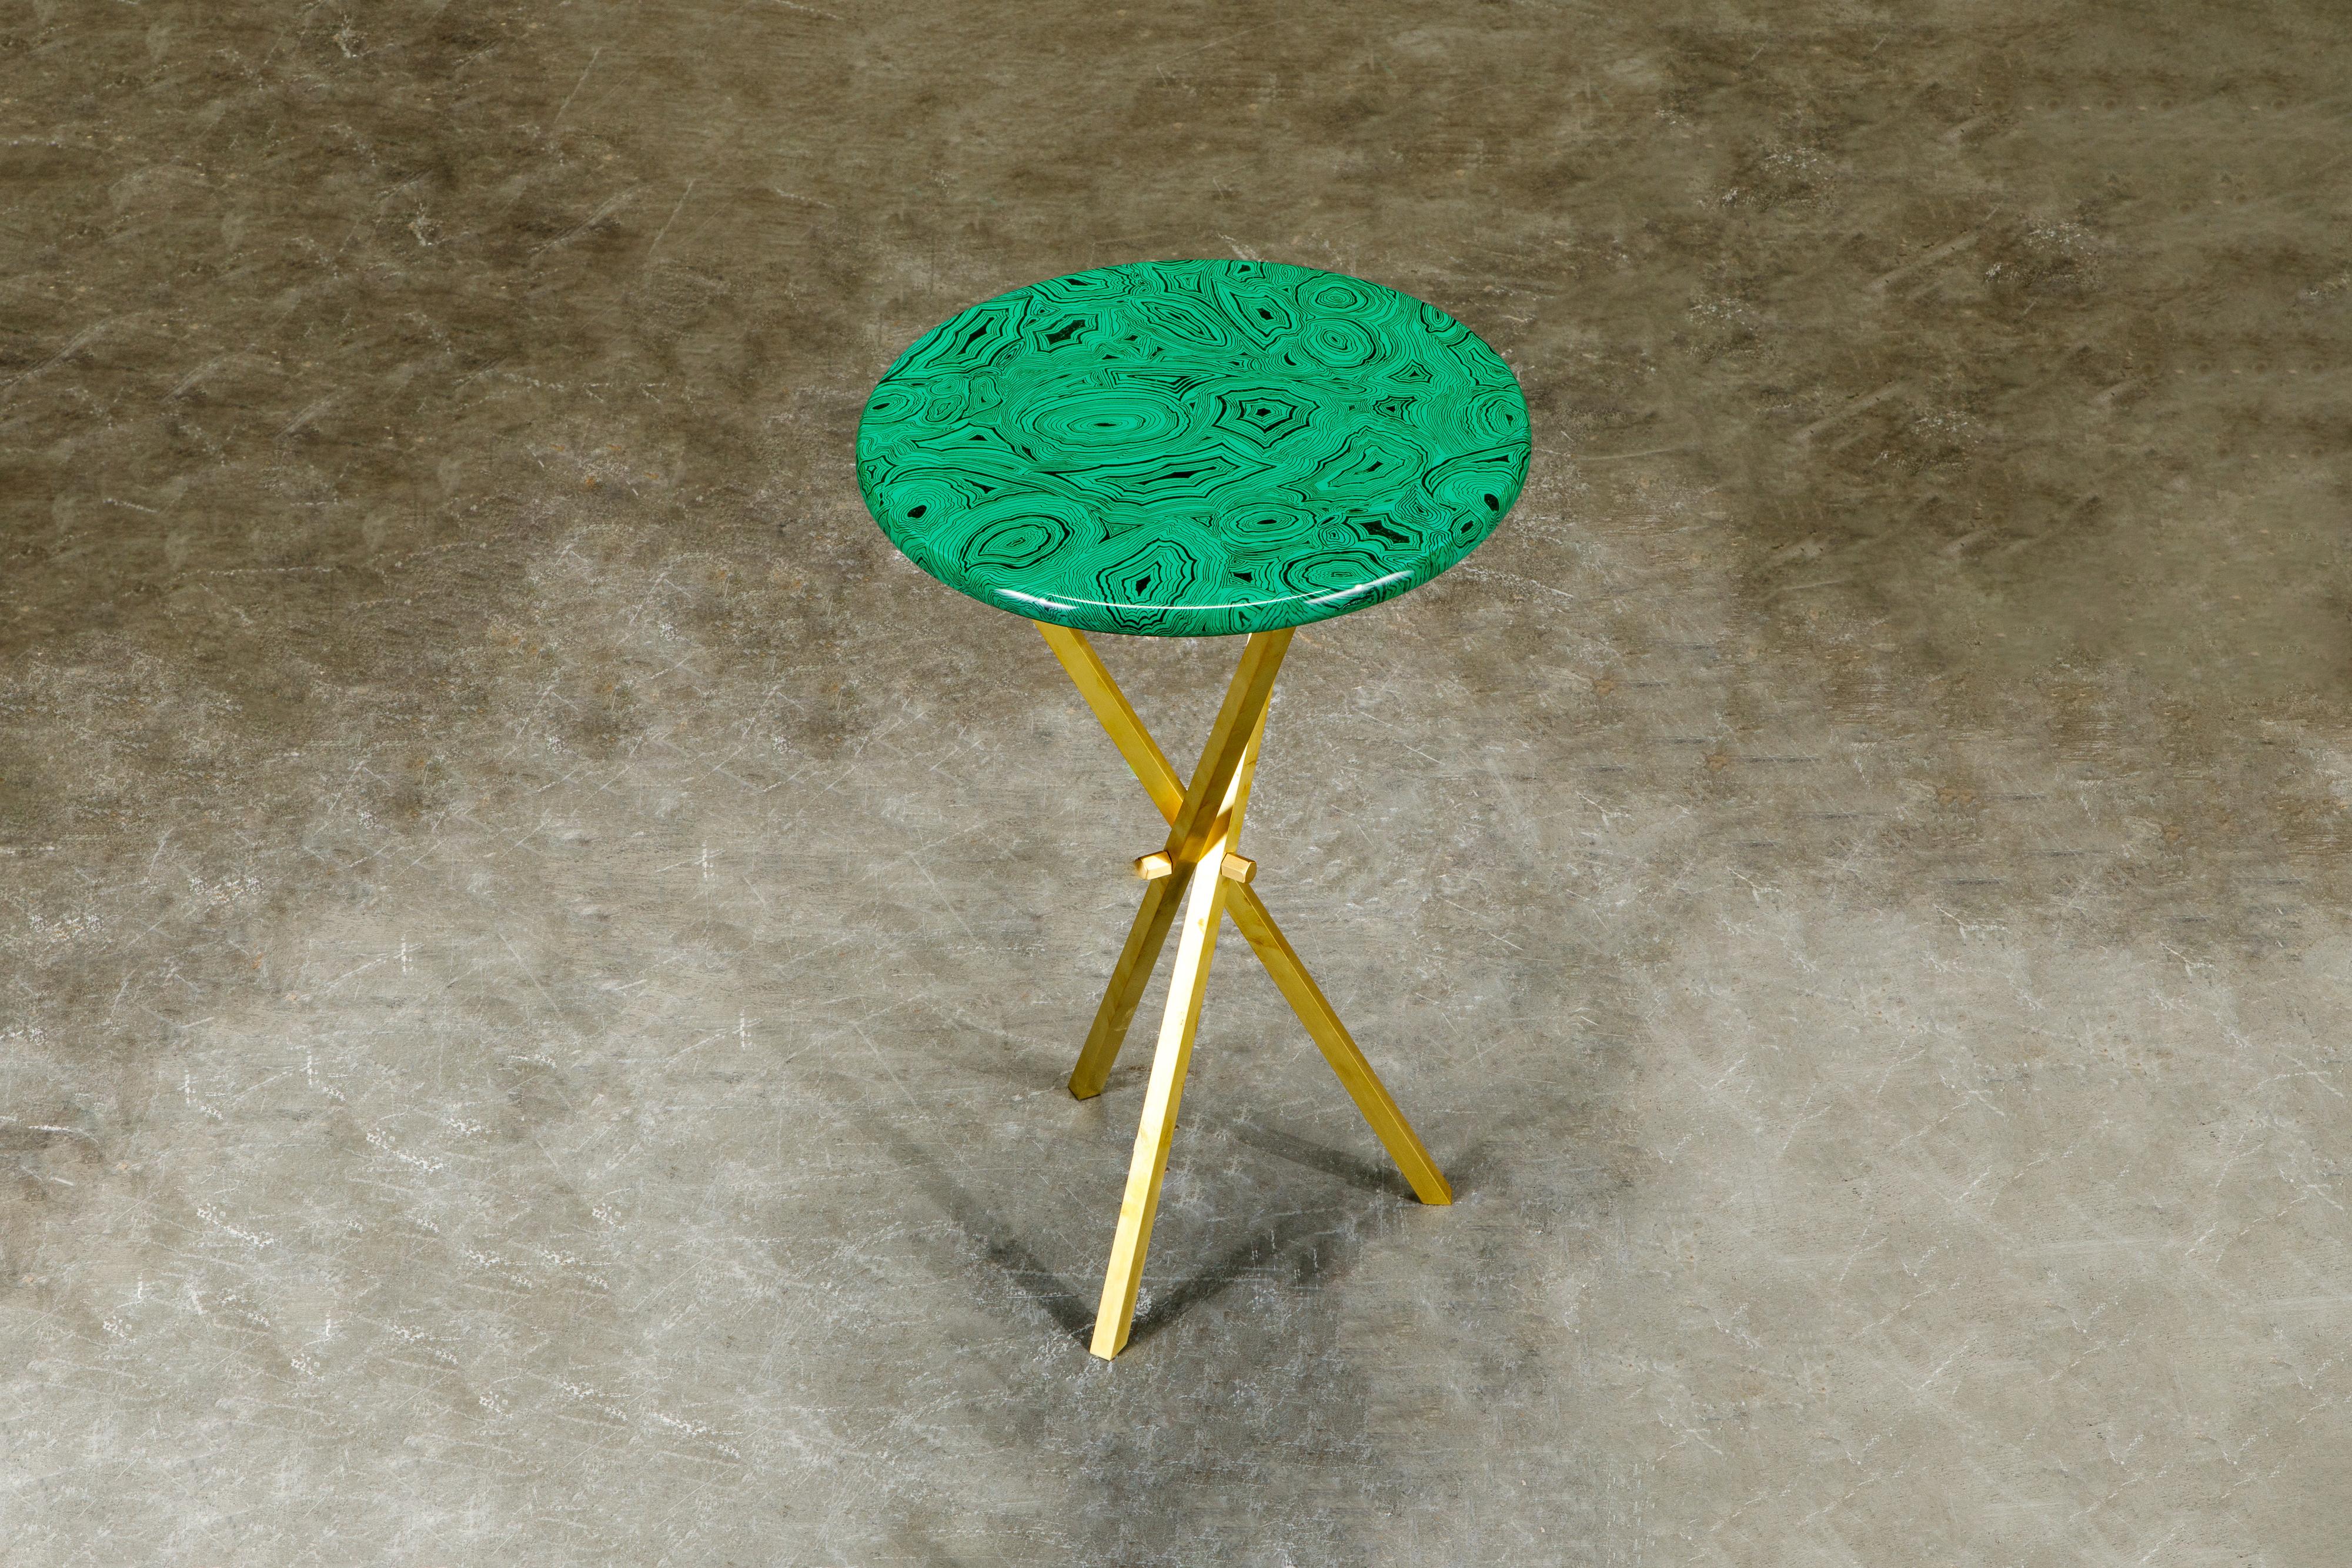 This gorgeous collectors item is a 'Malachite' side table by Piero Fornasetti, signed underneath with its original label. The side table is made with lacquered wood that has a malachite motif and is affixed on top of a brass tri-pod base that is